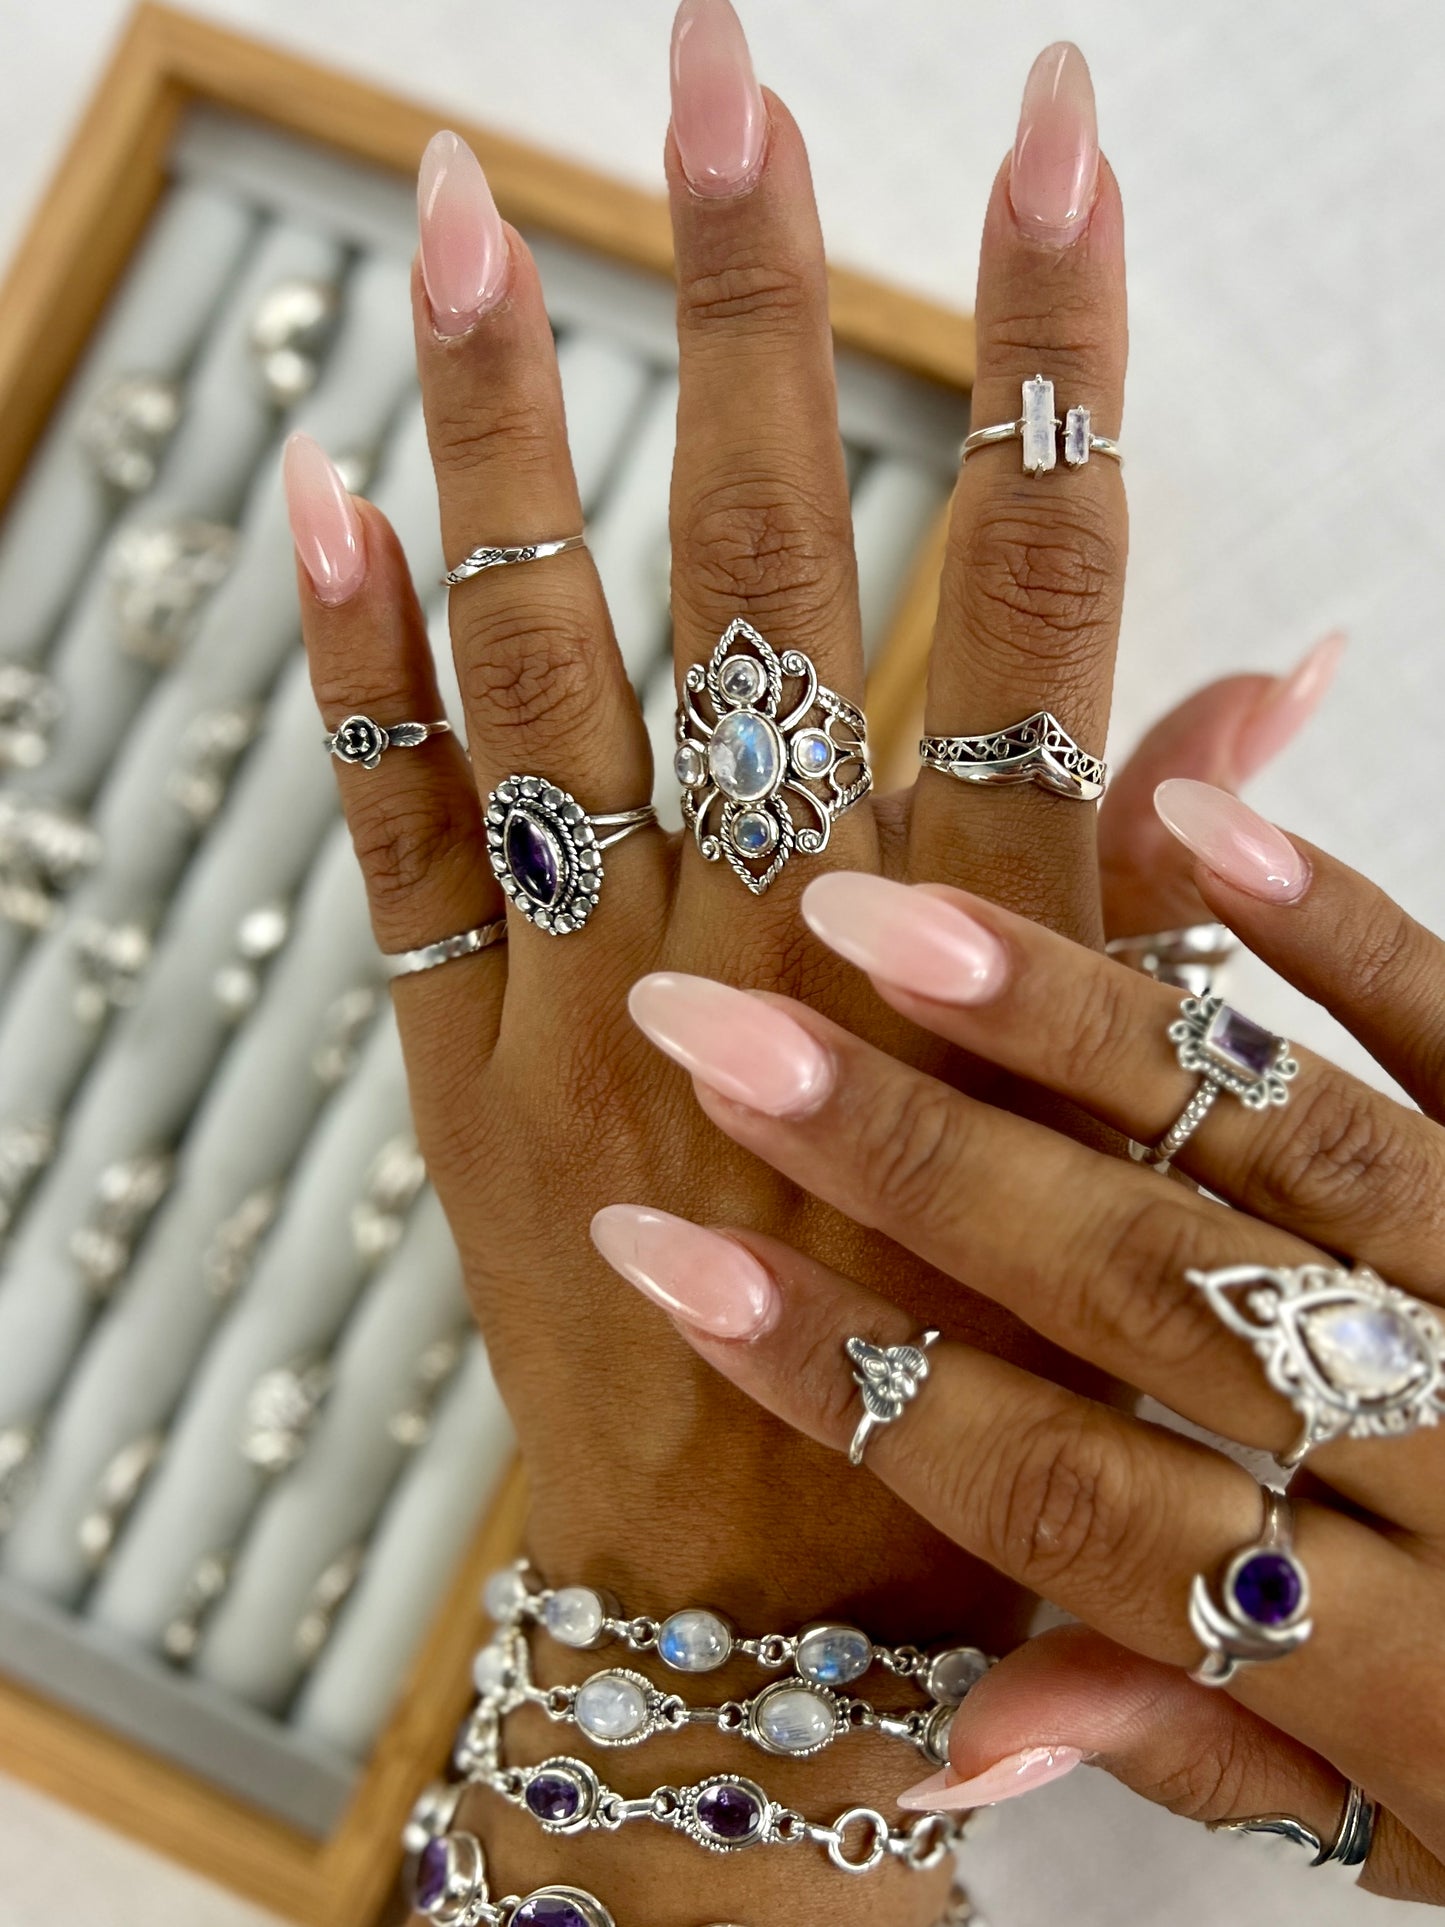 
                  
                    A woman's hand adorned with Super Silver rings, showcasing a gorgeous Marquise Shaped Vibrant Amethyst Stone Ring set in one of the rings.
                  
                